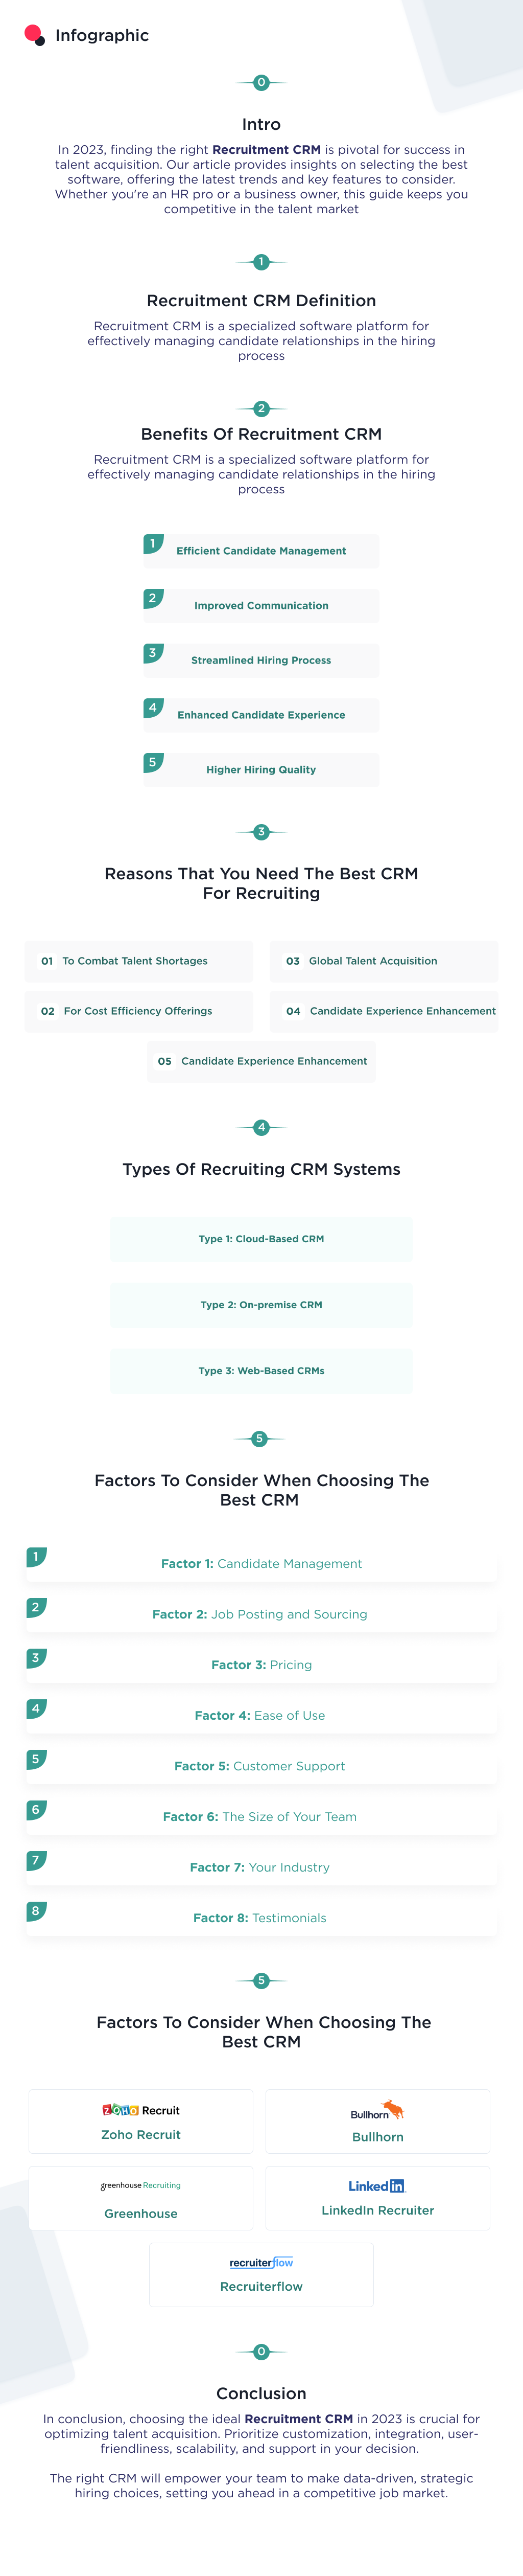 the image shows the bonus infographic of the article "How to Choose the Best Recruitment CRM in 2023"